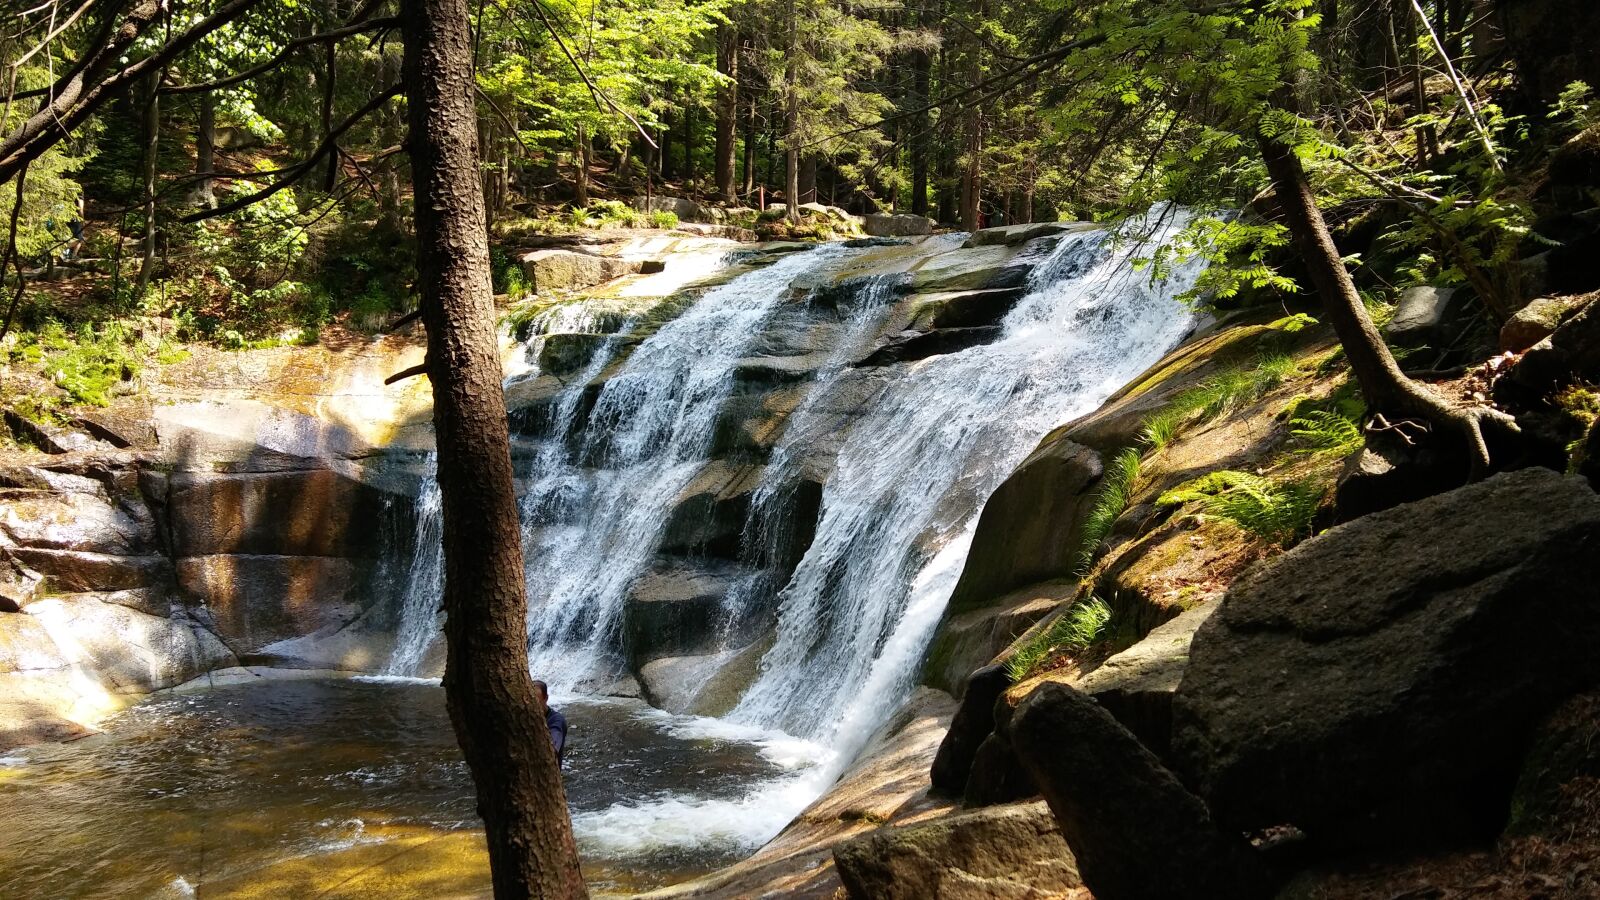 LG K10 sample photo. Forest, waterfall, the giant photography